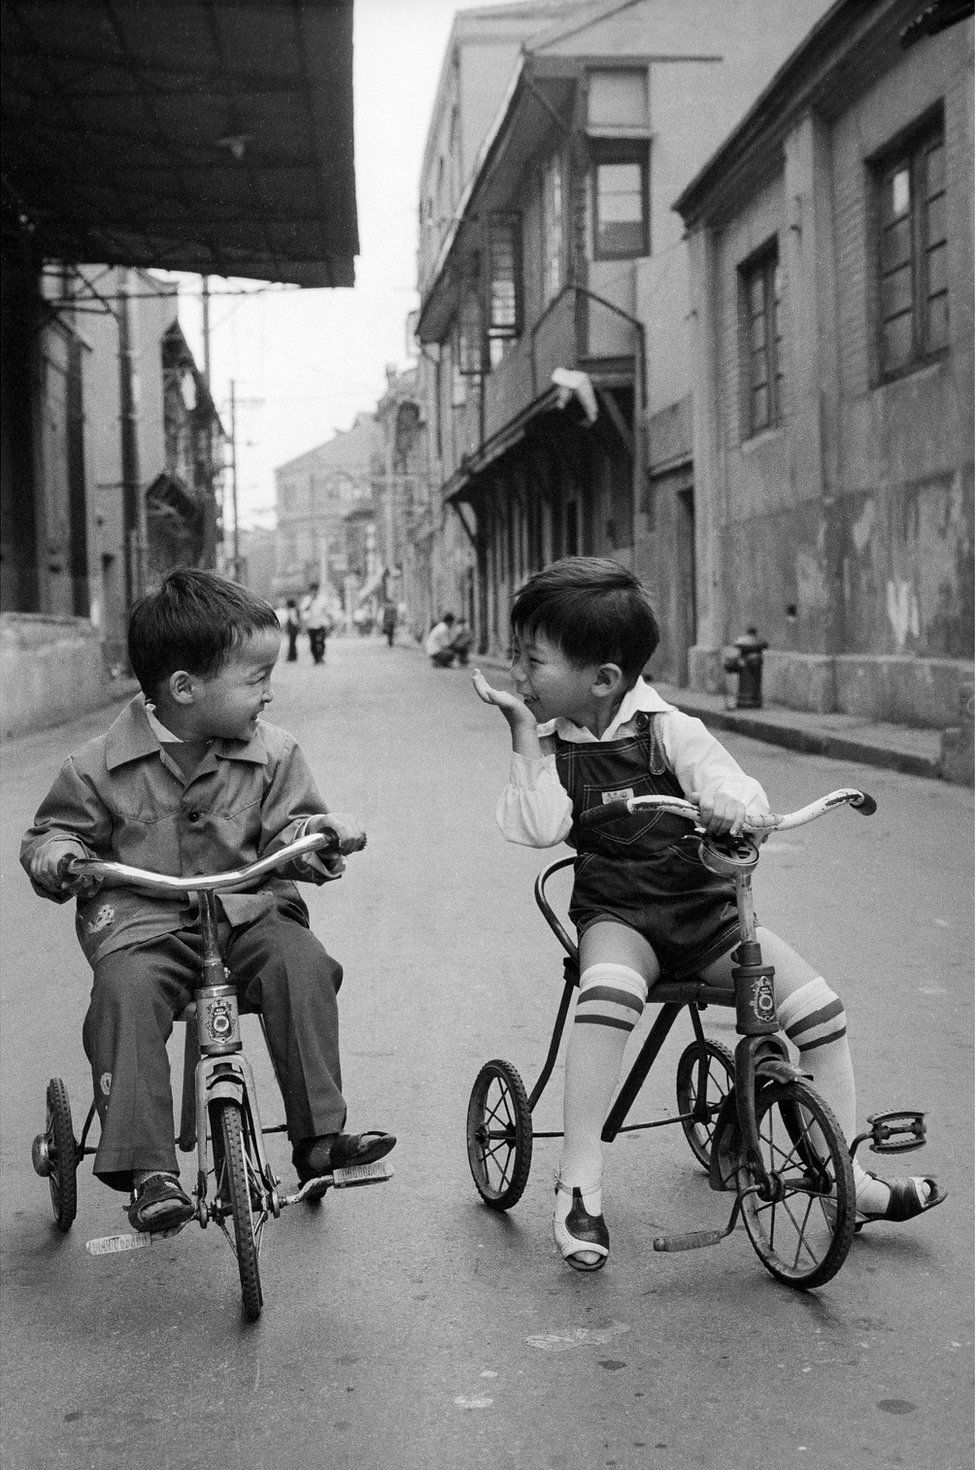 Two boys sit on bikes in the street